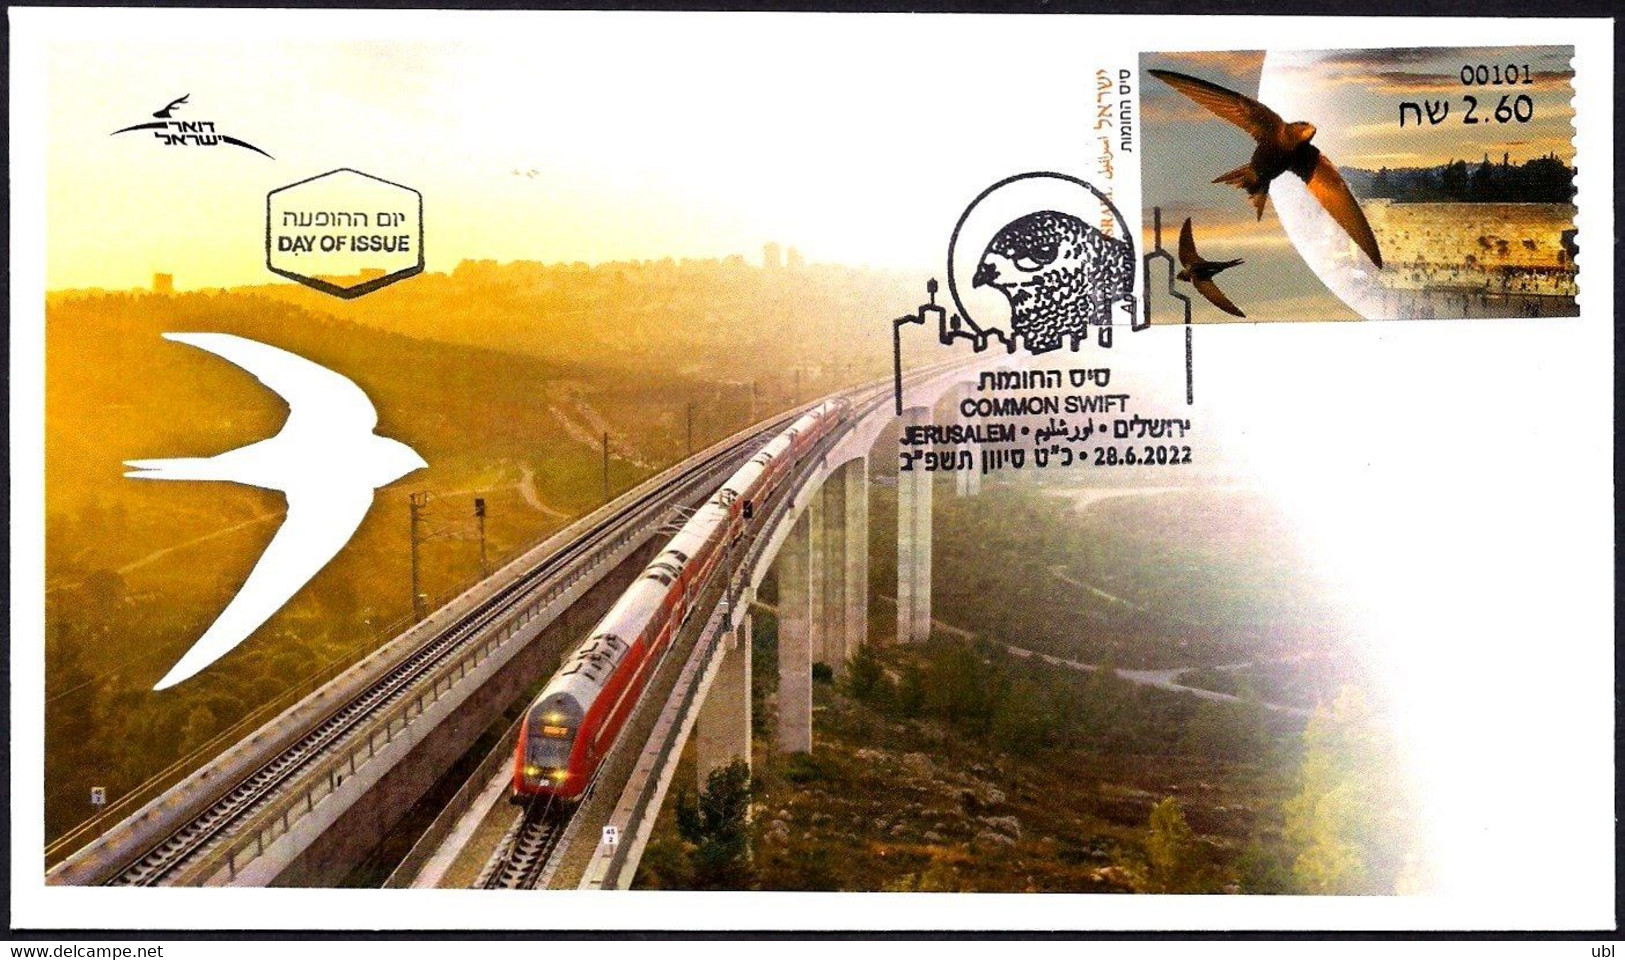 ISRAEL 2022 - Animals In Domestic Areas, The Common Swift - Jerusalem ATM # 101 Label - FDC - Swallows